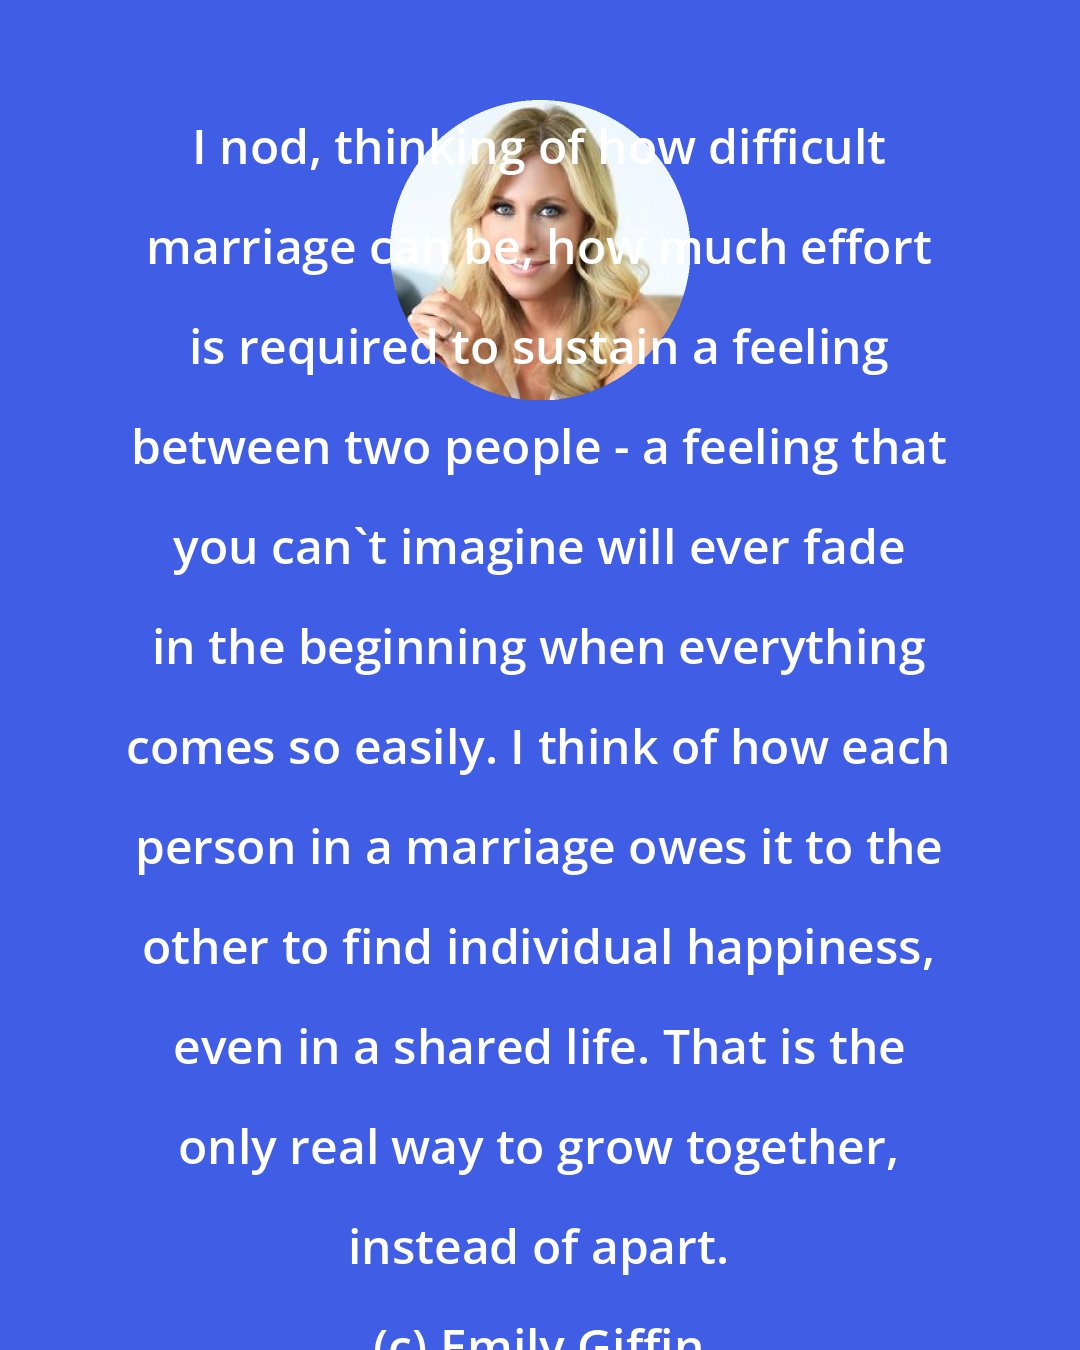 Emily Giffin: I nod, thinking of how difficult marriage can be, how much effort is required to sustain a feeling between two people - a feeling that you can't imagine will ever fade in the beginning when everything comes so easily. I think of how each person in a marriage owes it to the other to find individual happiness, even in a shared life. That is the only real way to grow together, instead of apart.